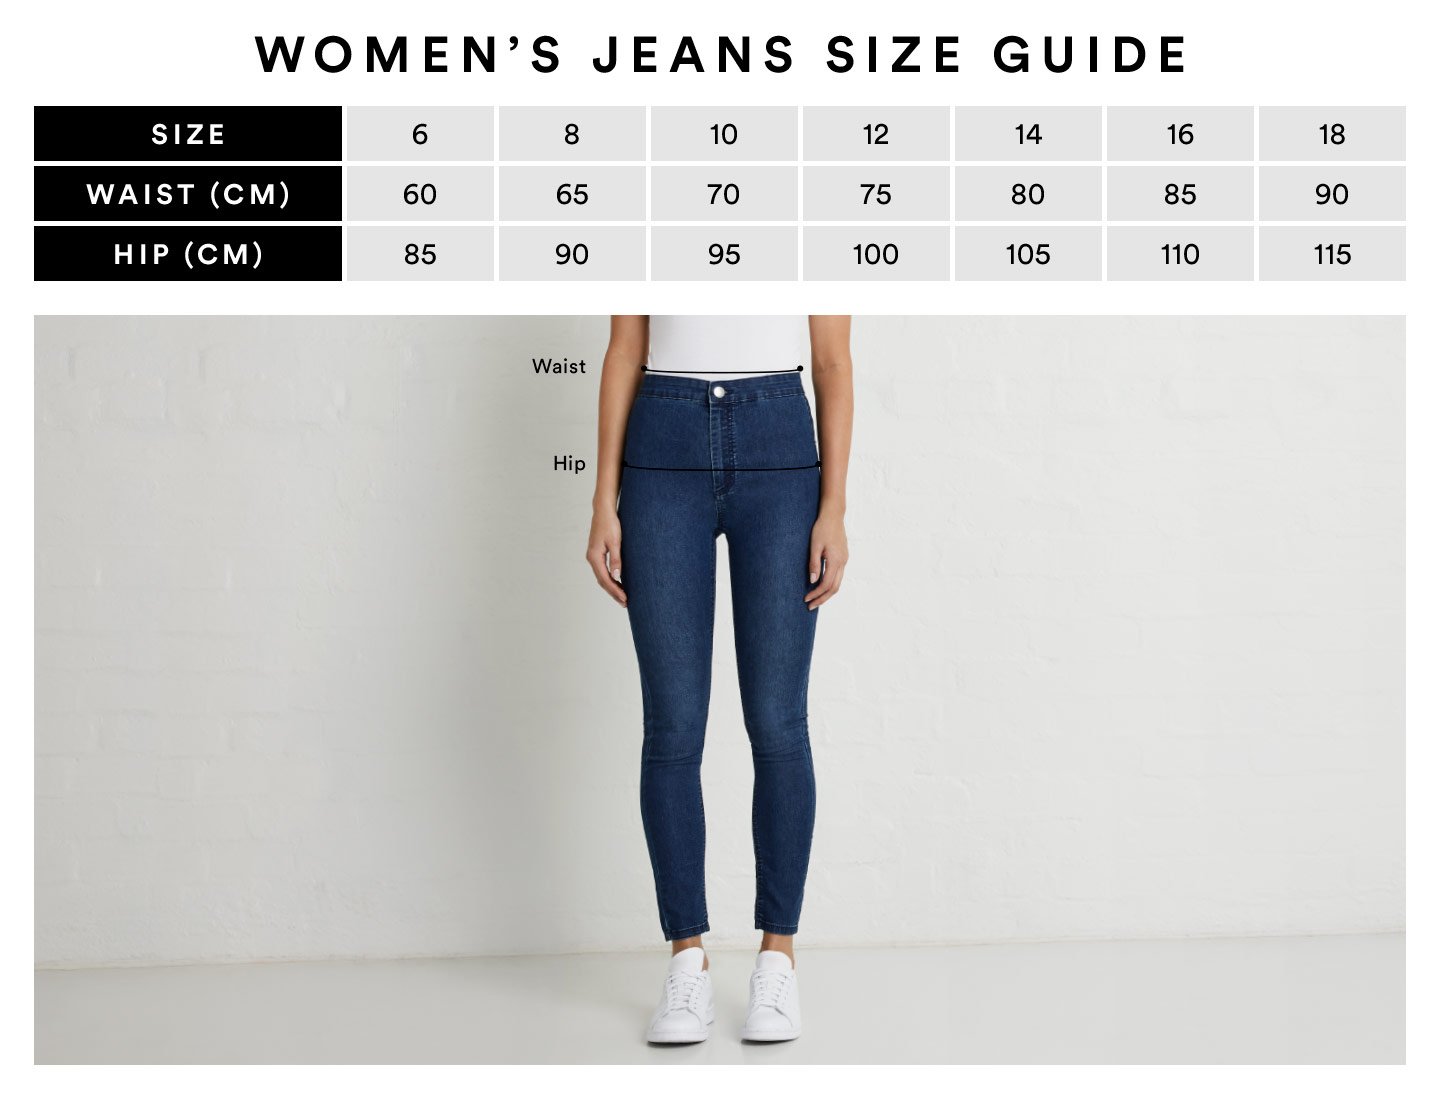 jeanswest size guide